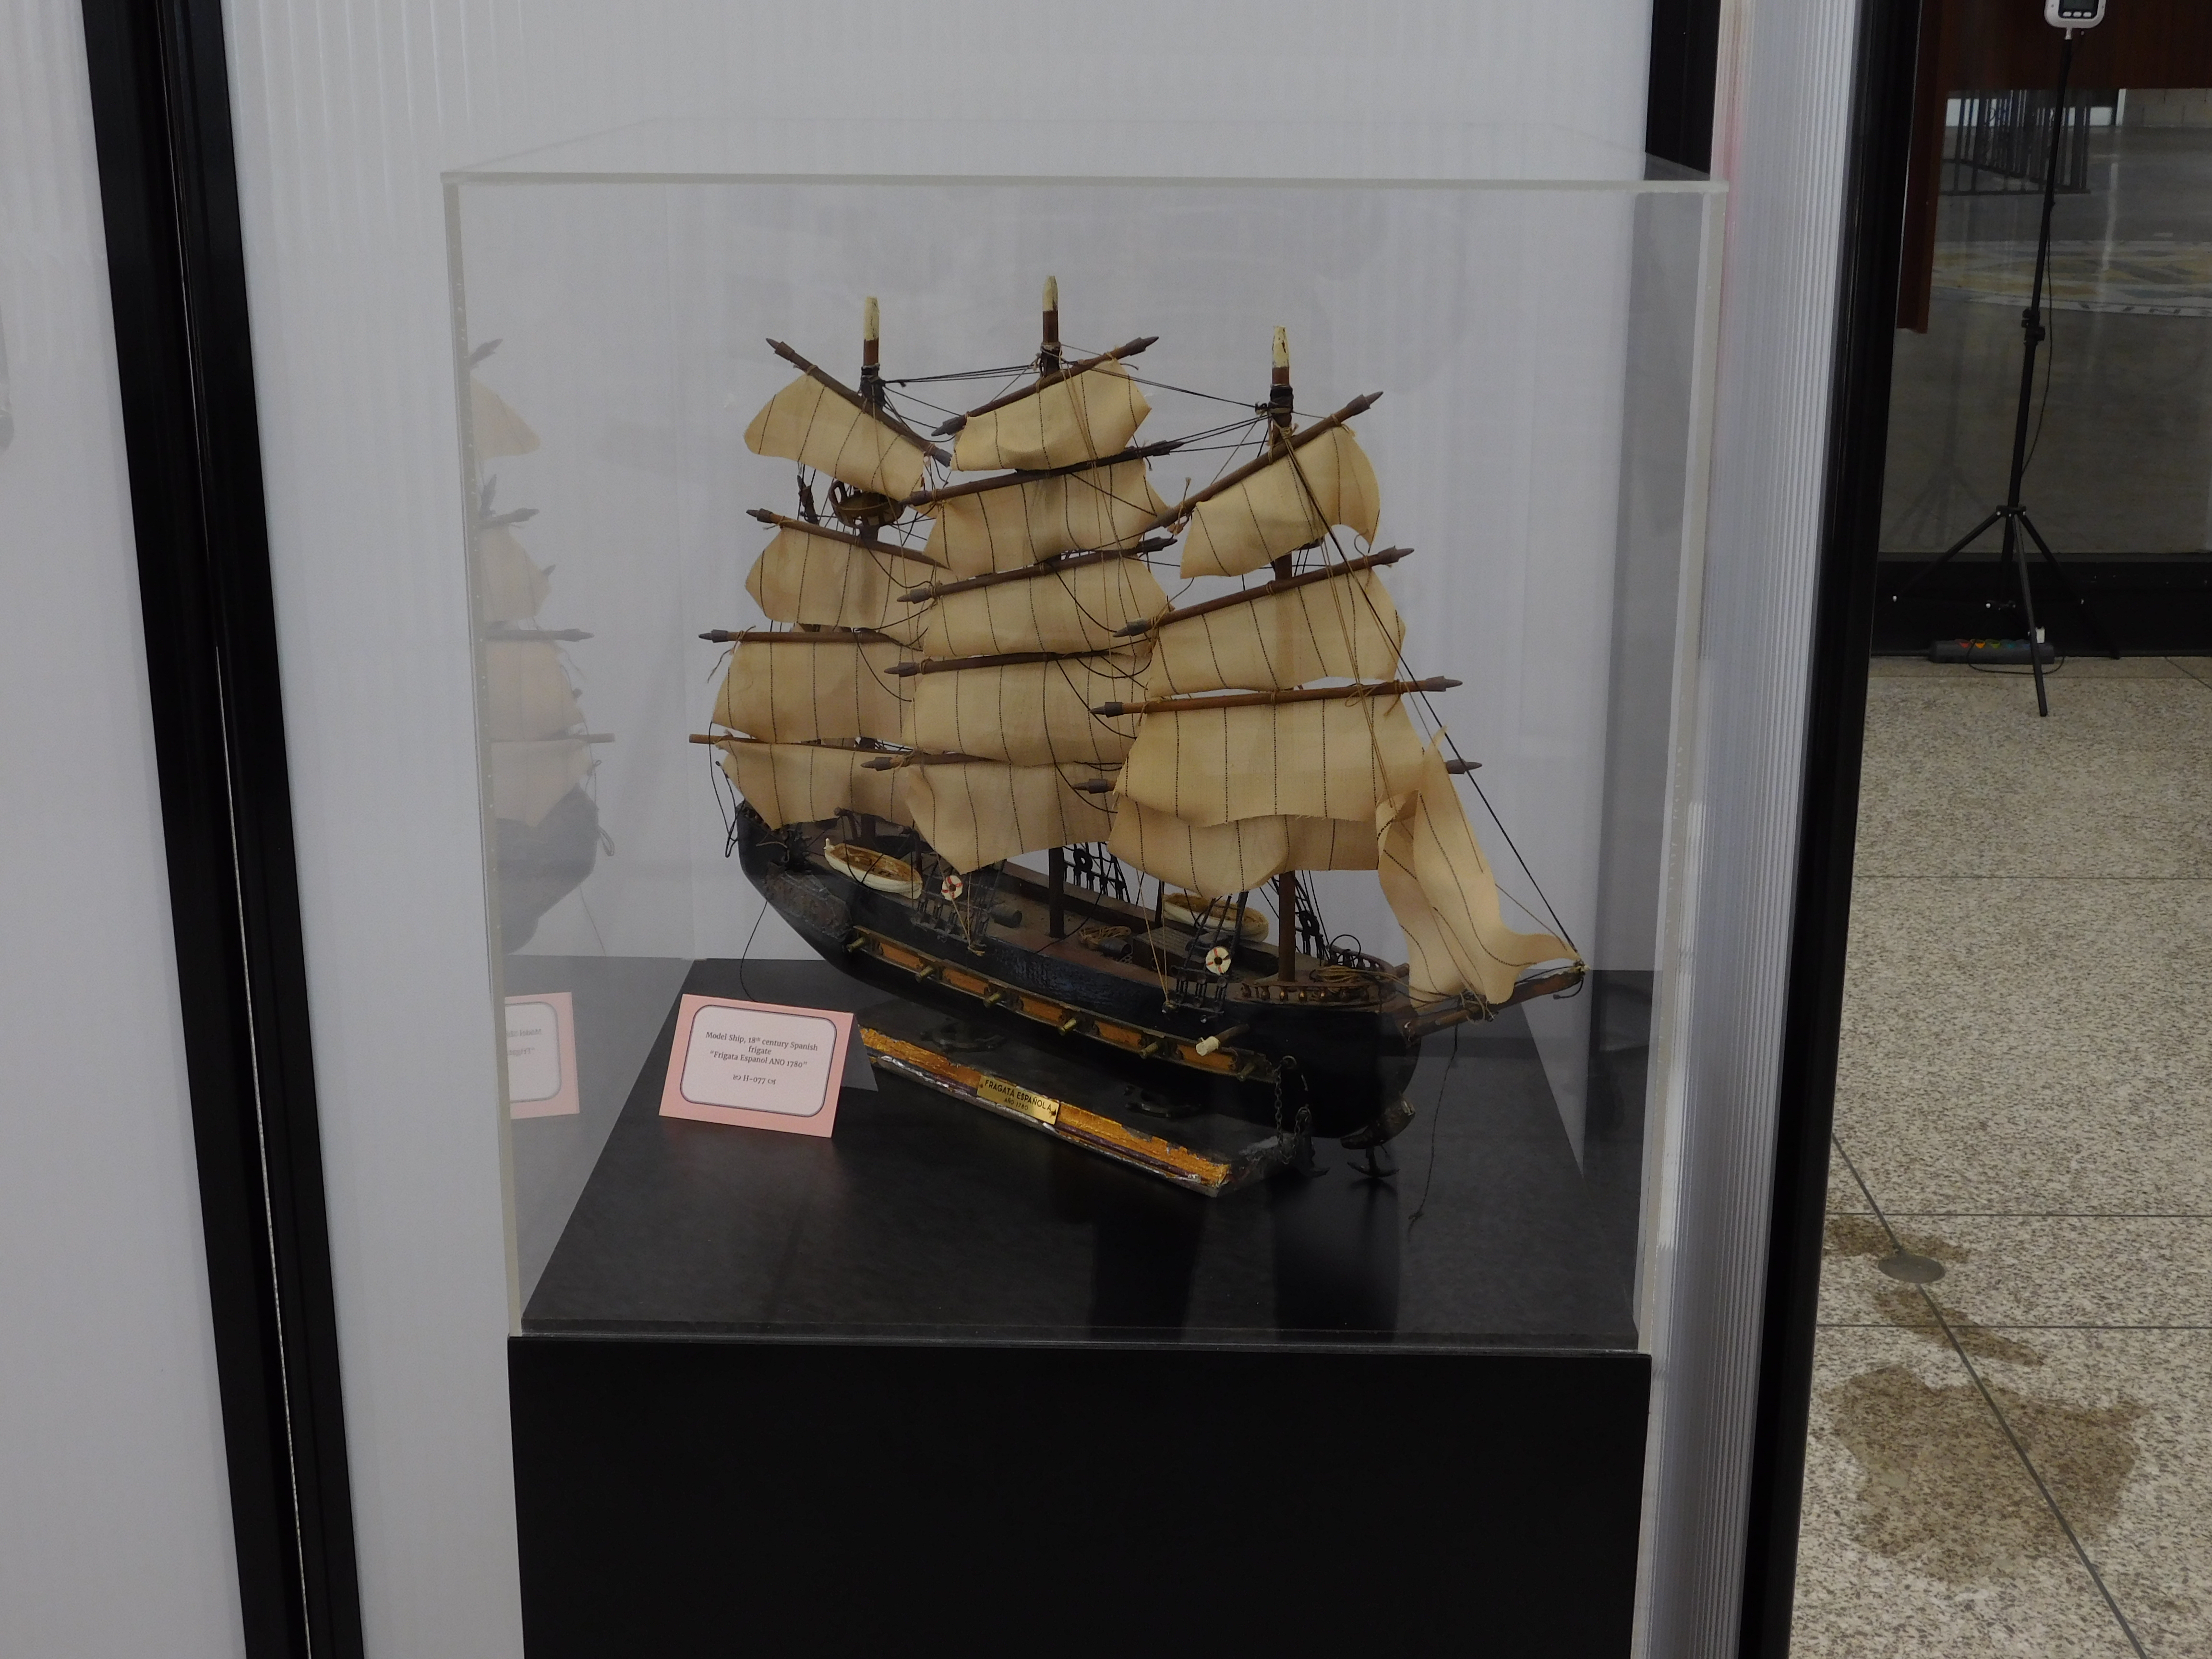 Image of frigate ship minature gifted to the City of San Diego